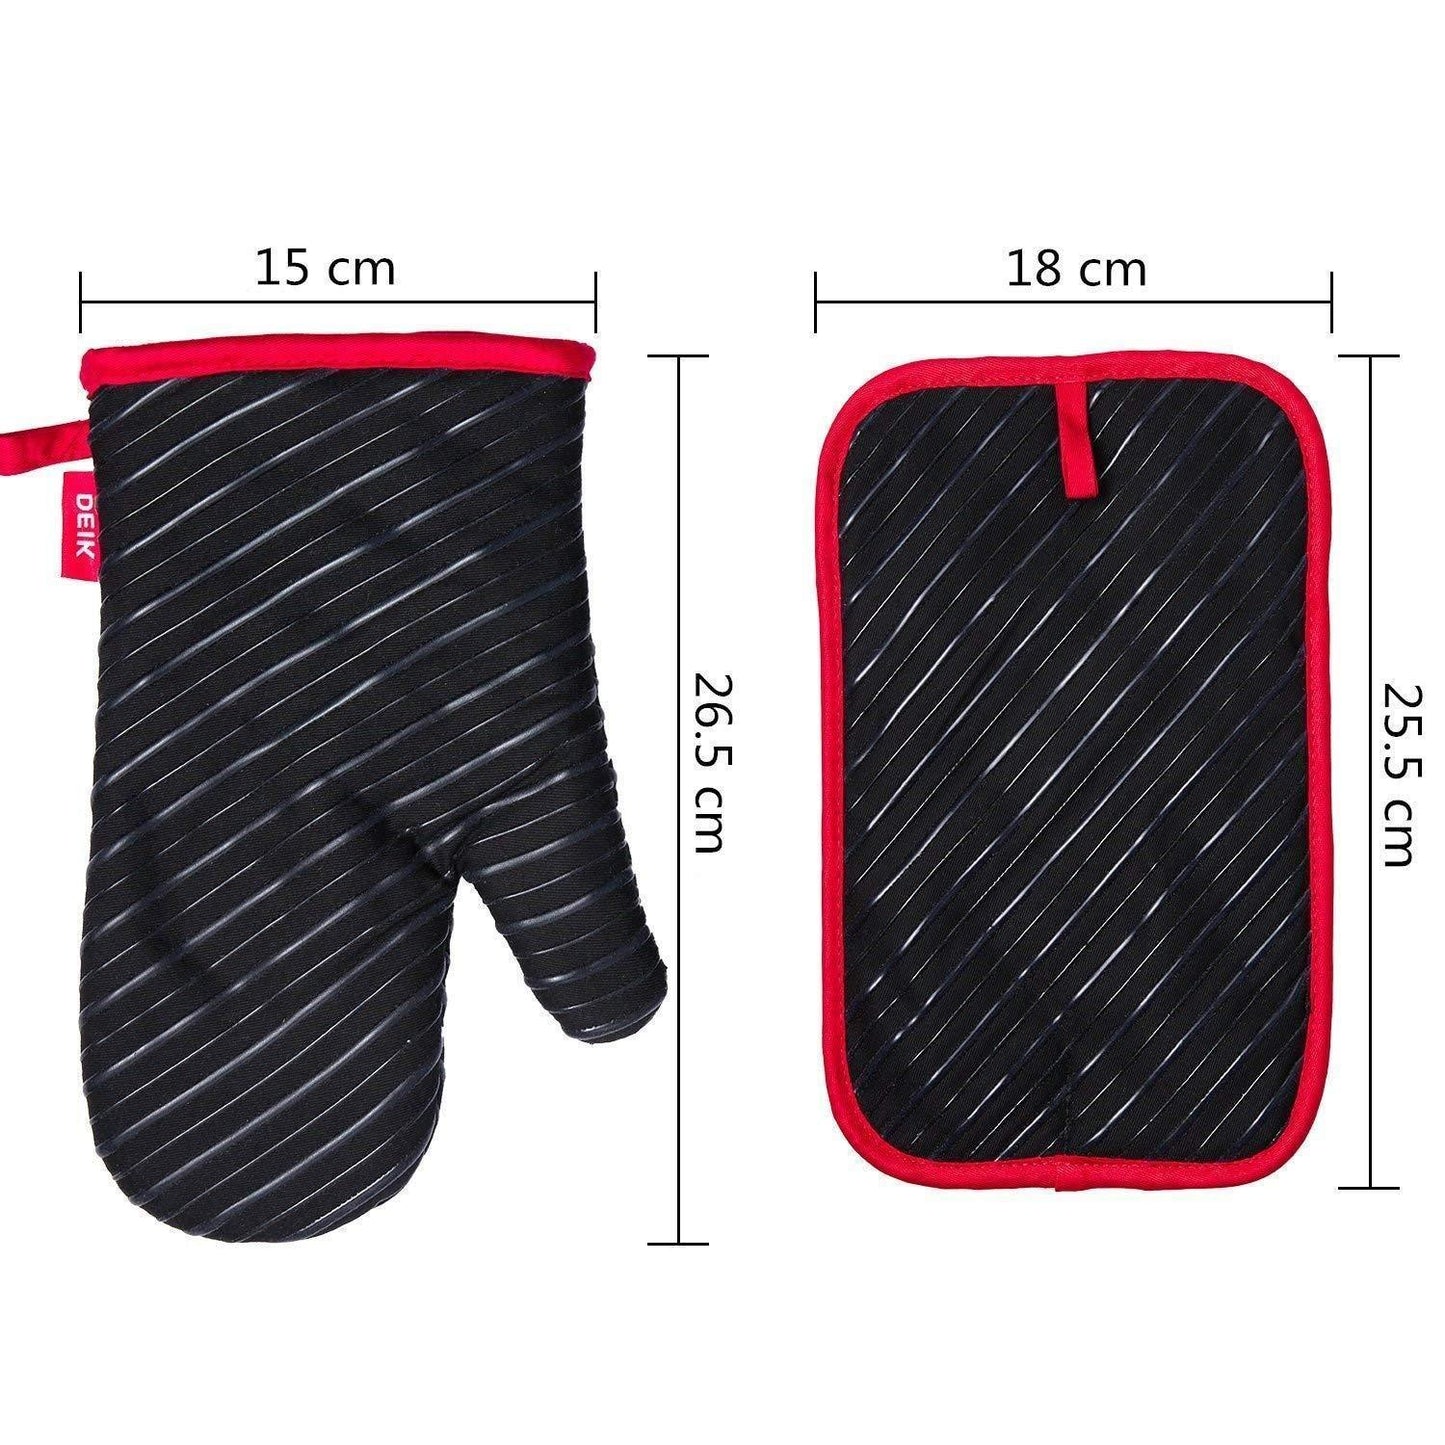 Discover the best deik oven mitts and potholders 4 piece sets for kitchen counter safe mats and advanced heat resistant oven mitt non slip textured grip pot holders nano technology